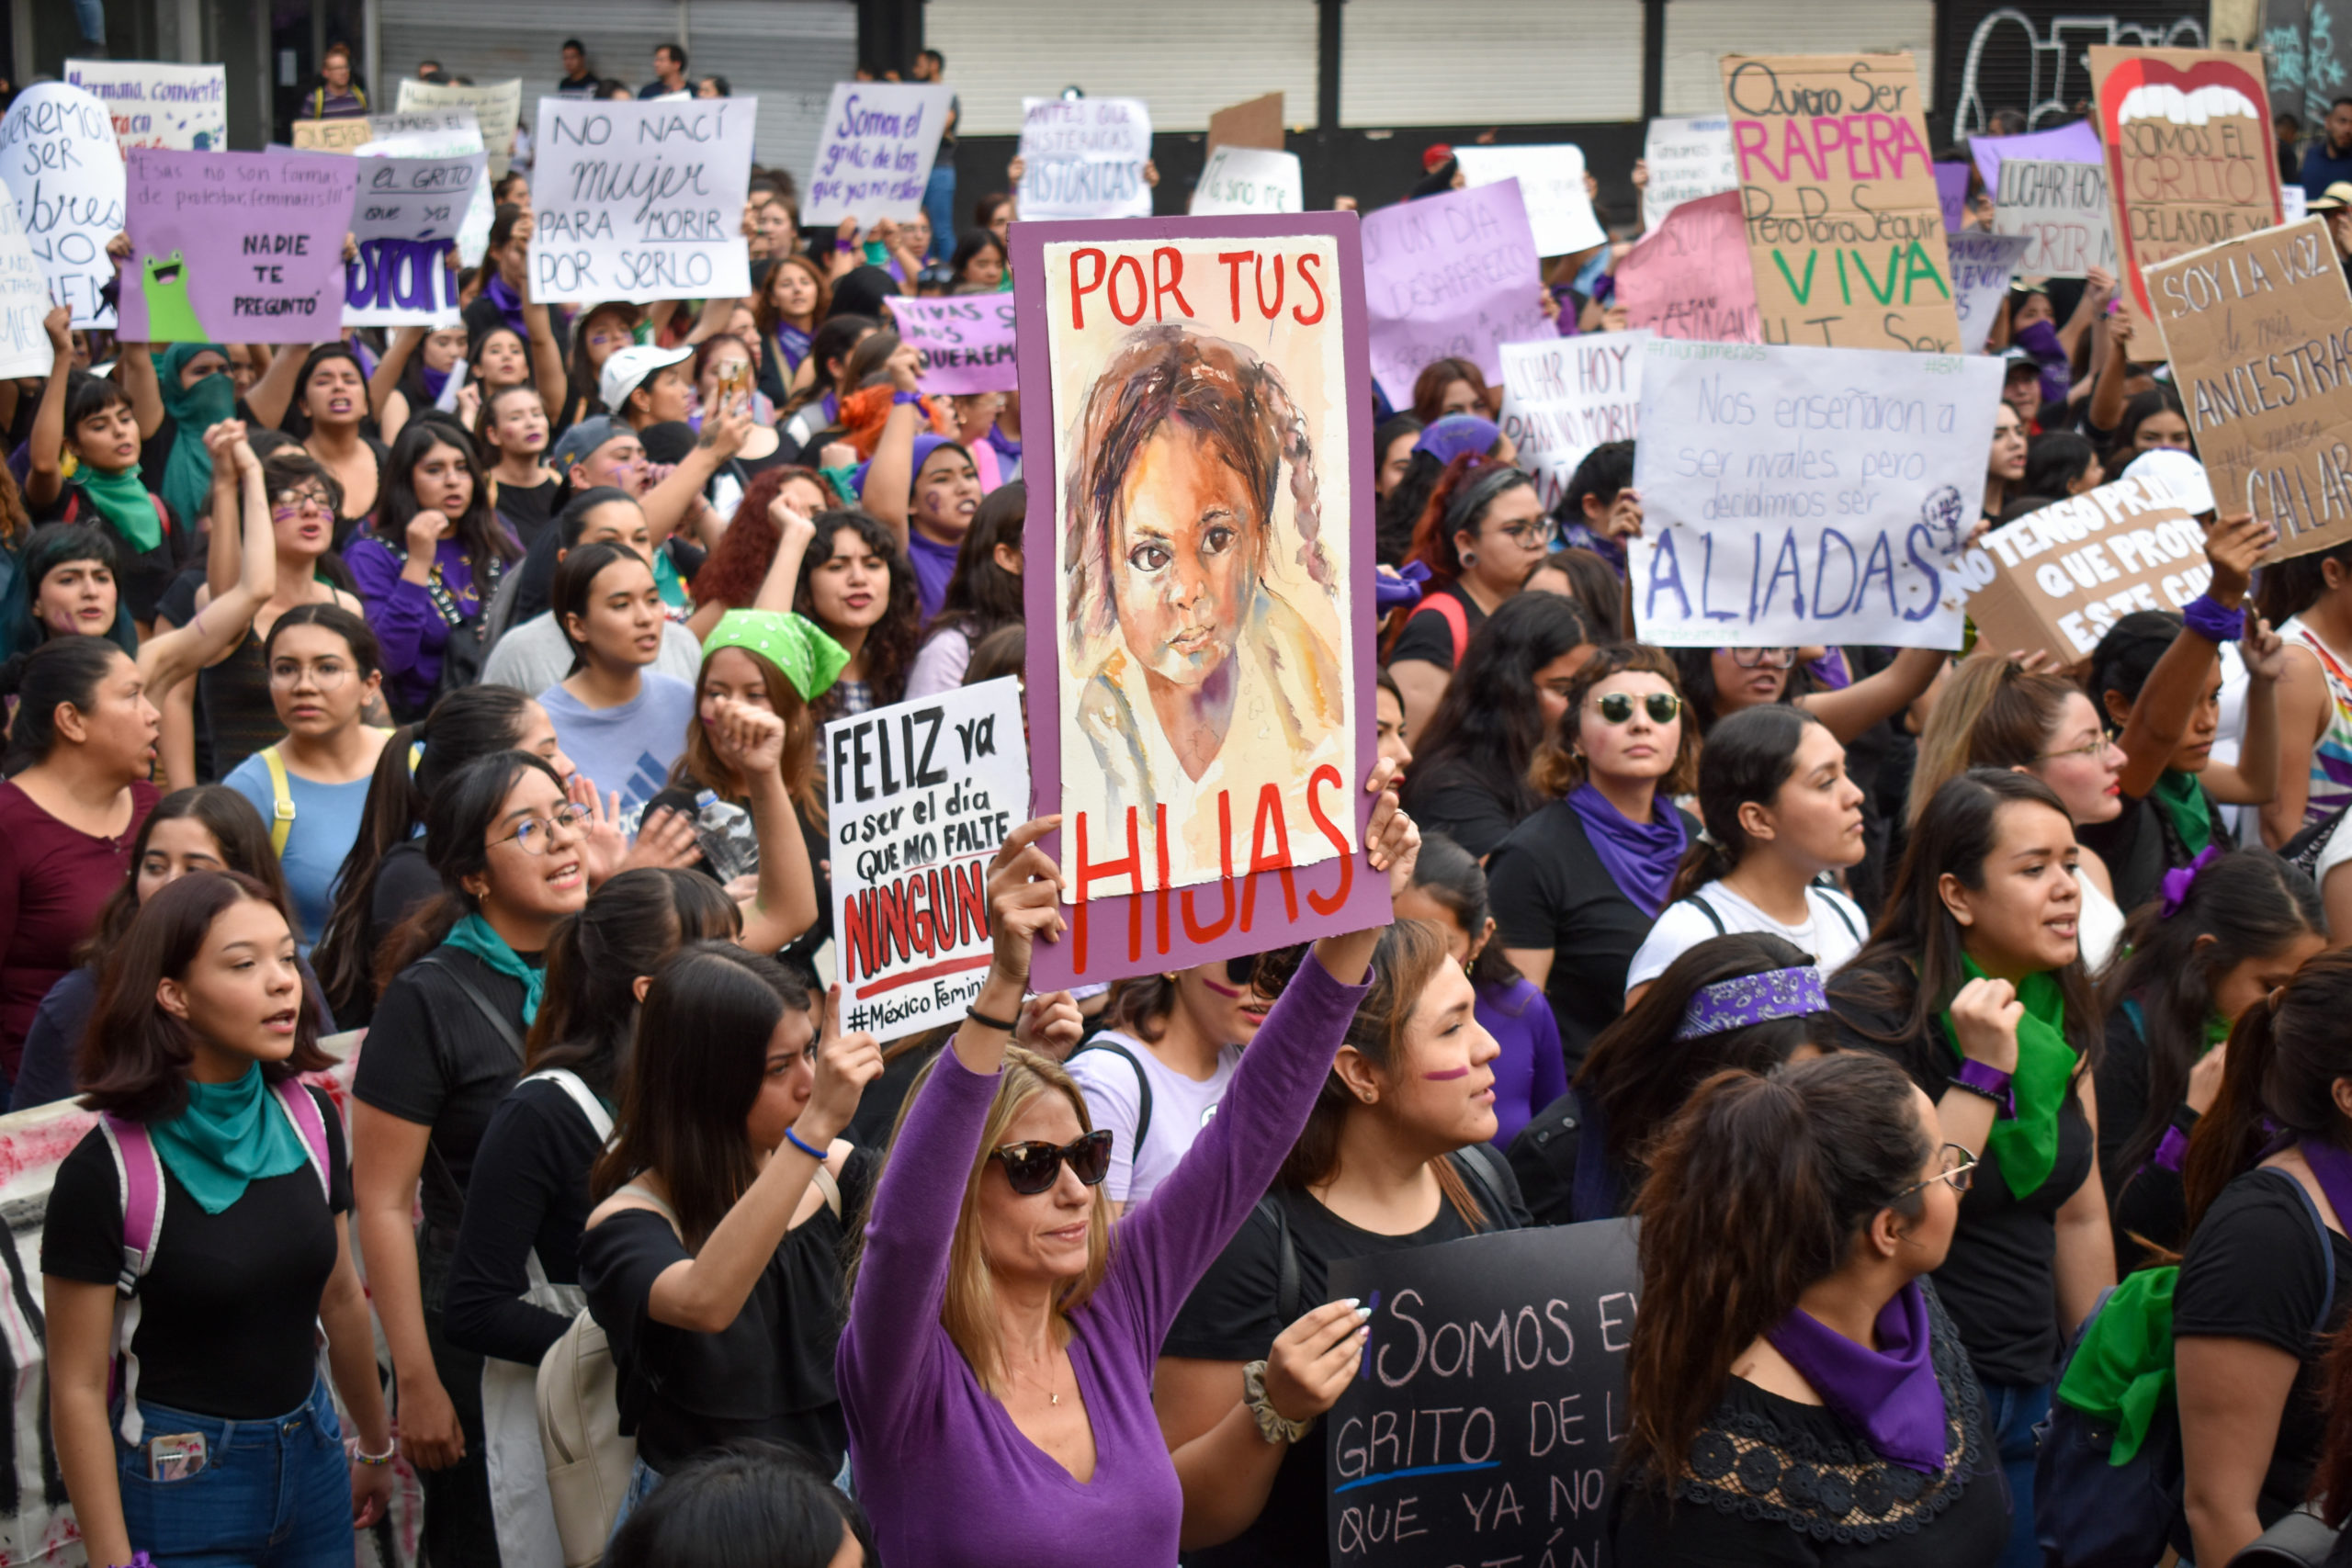 Large group of Hispanic women protesting in green bandanas, one wearing purple in focus in the forefront holds up a sign that says "por tus hijas" or "for your daughters" with a picture of a young girl on in.